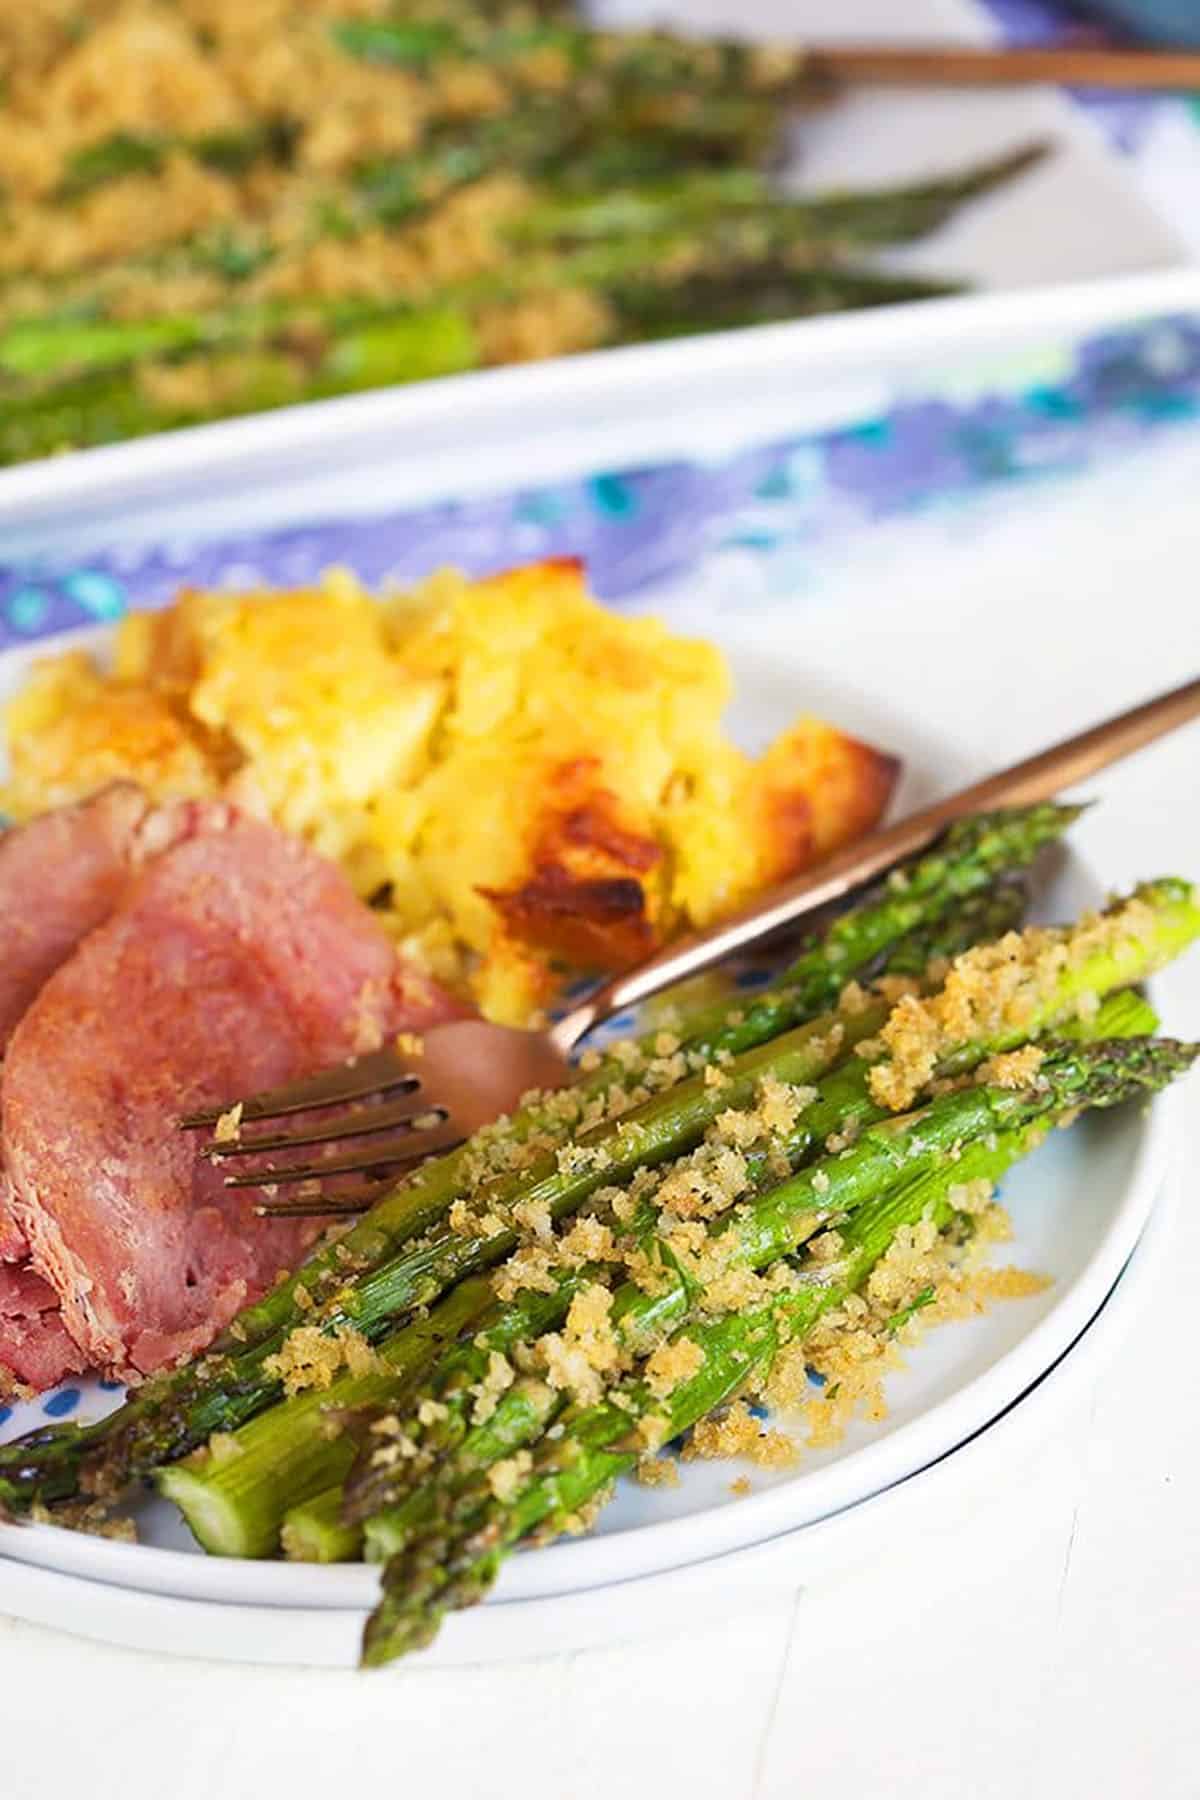 Baked asparagus on a plate with ham and pineapple casserole.